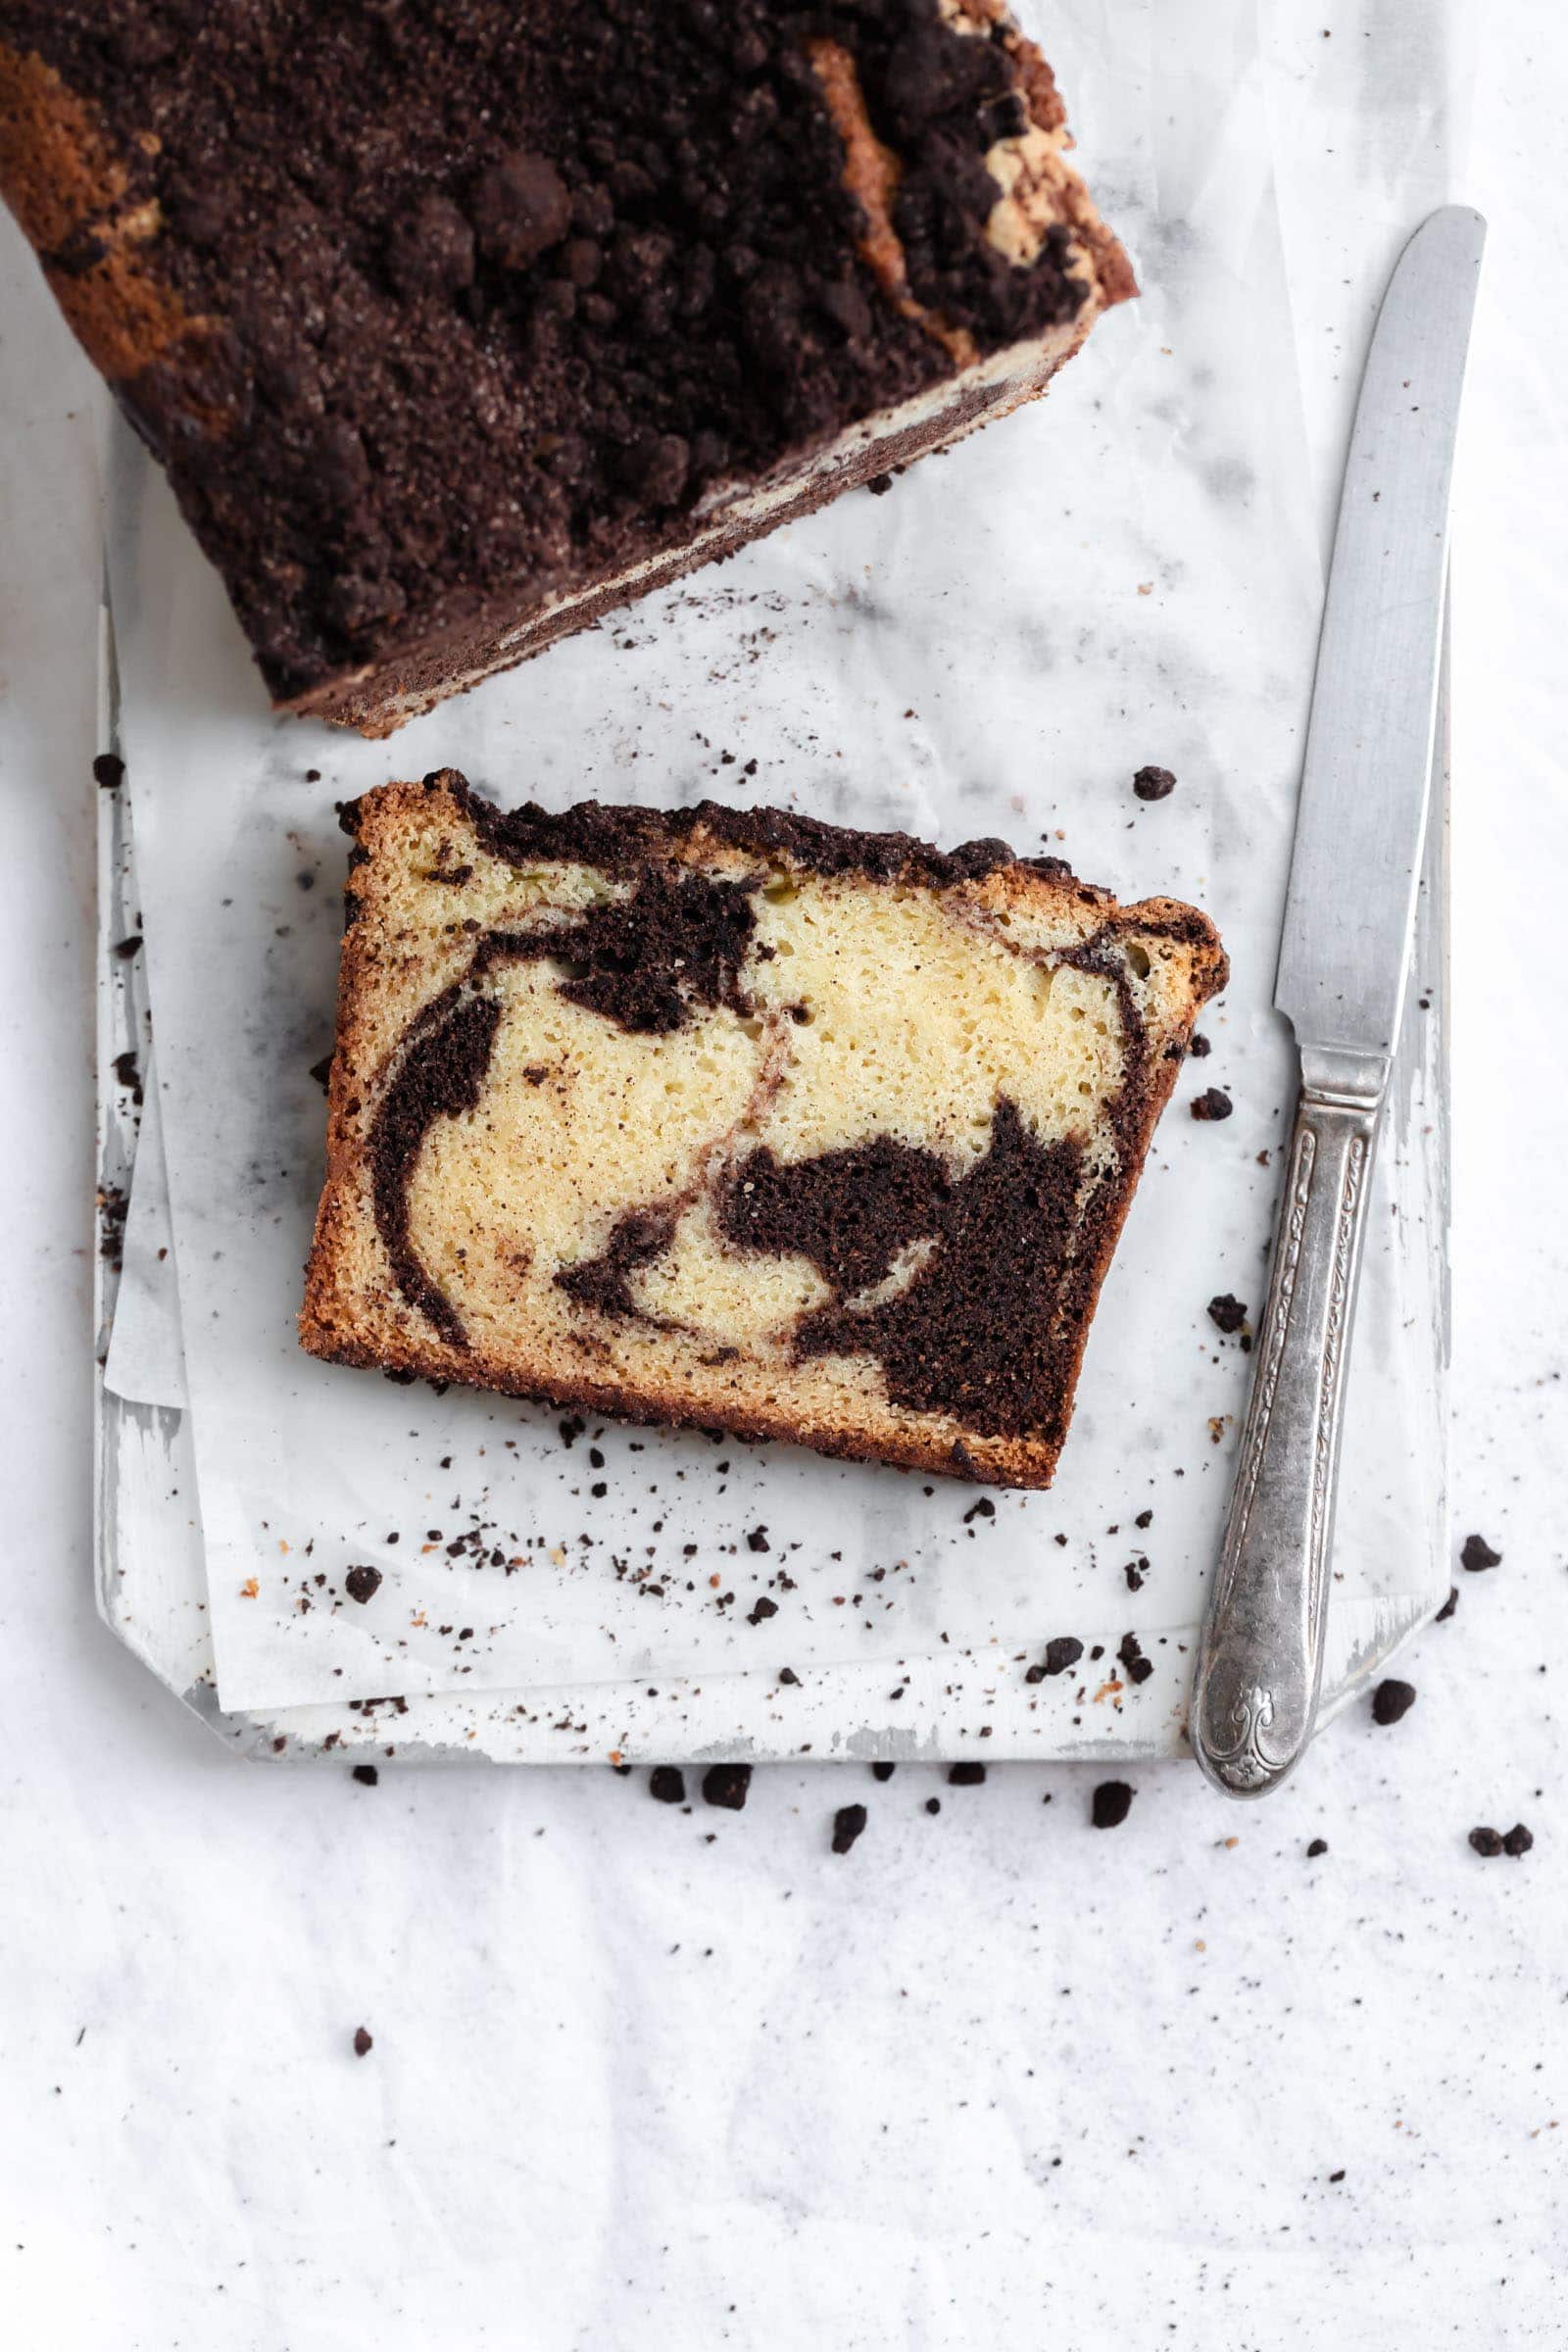 Chocolate Malt Marble Cake with Peanut Butter Frosting.